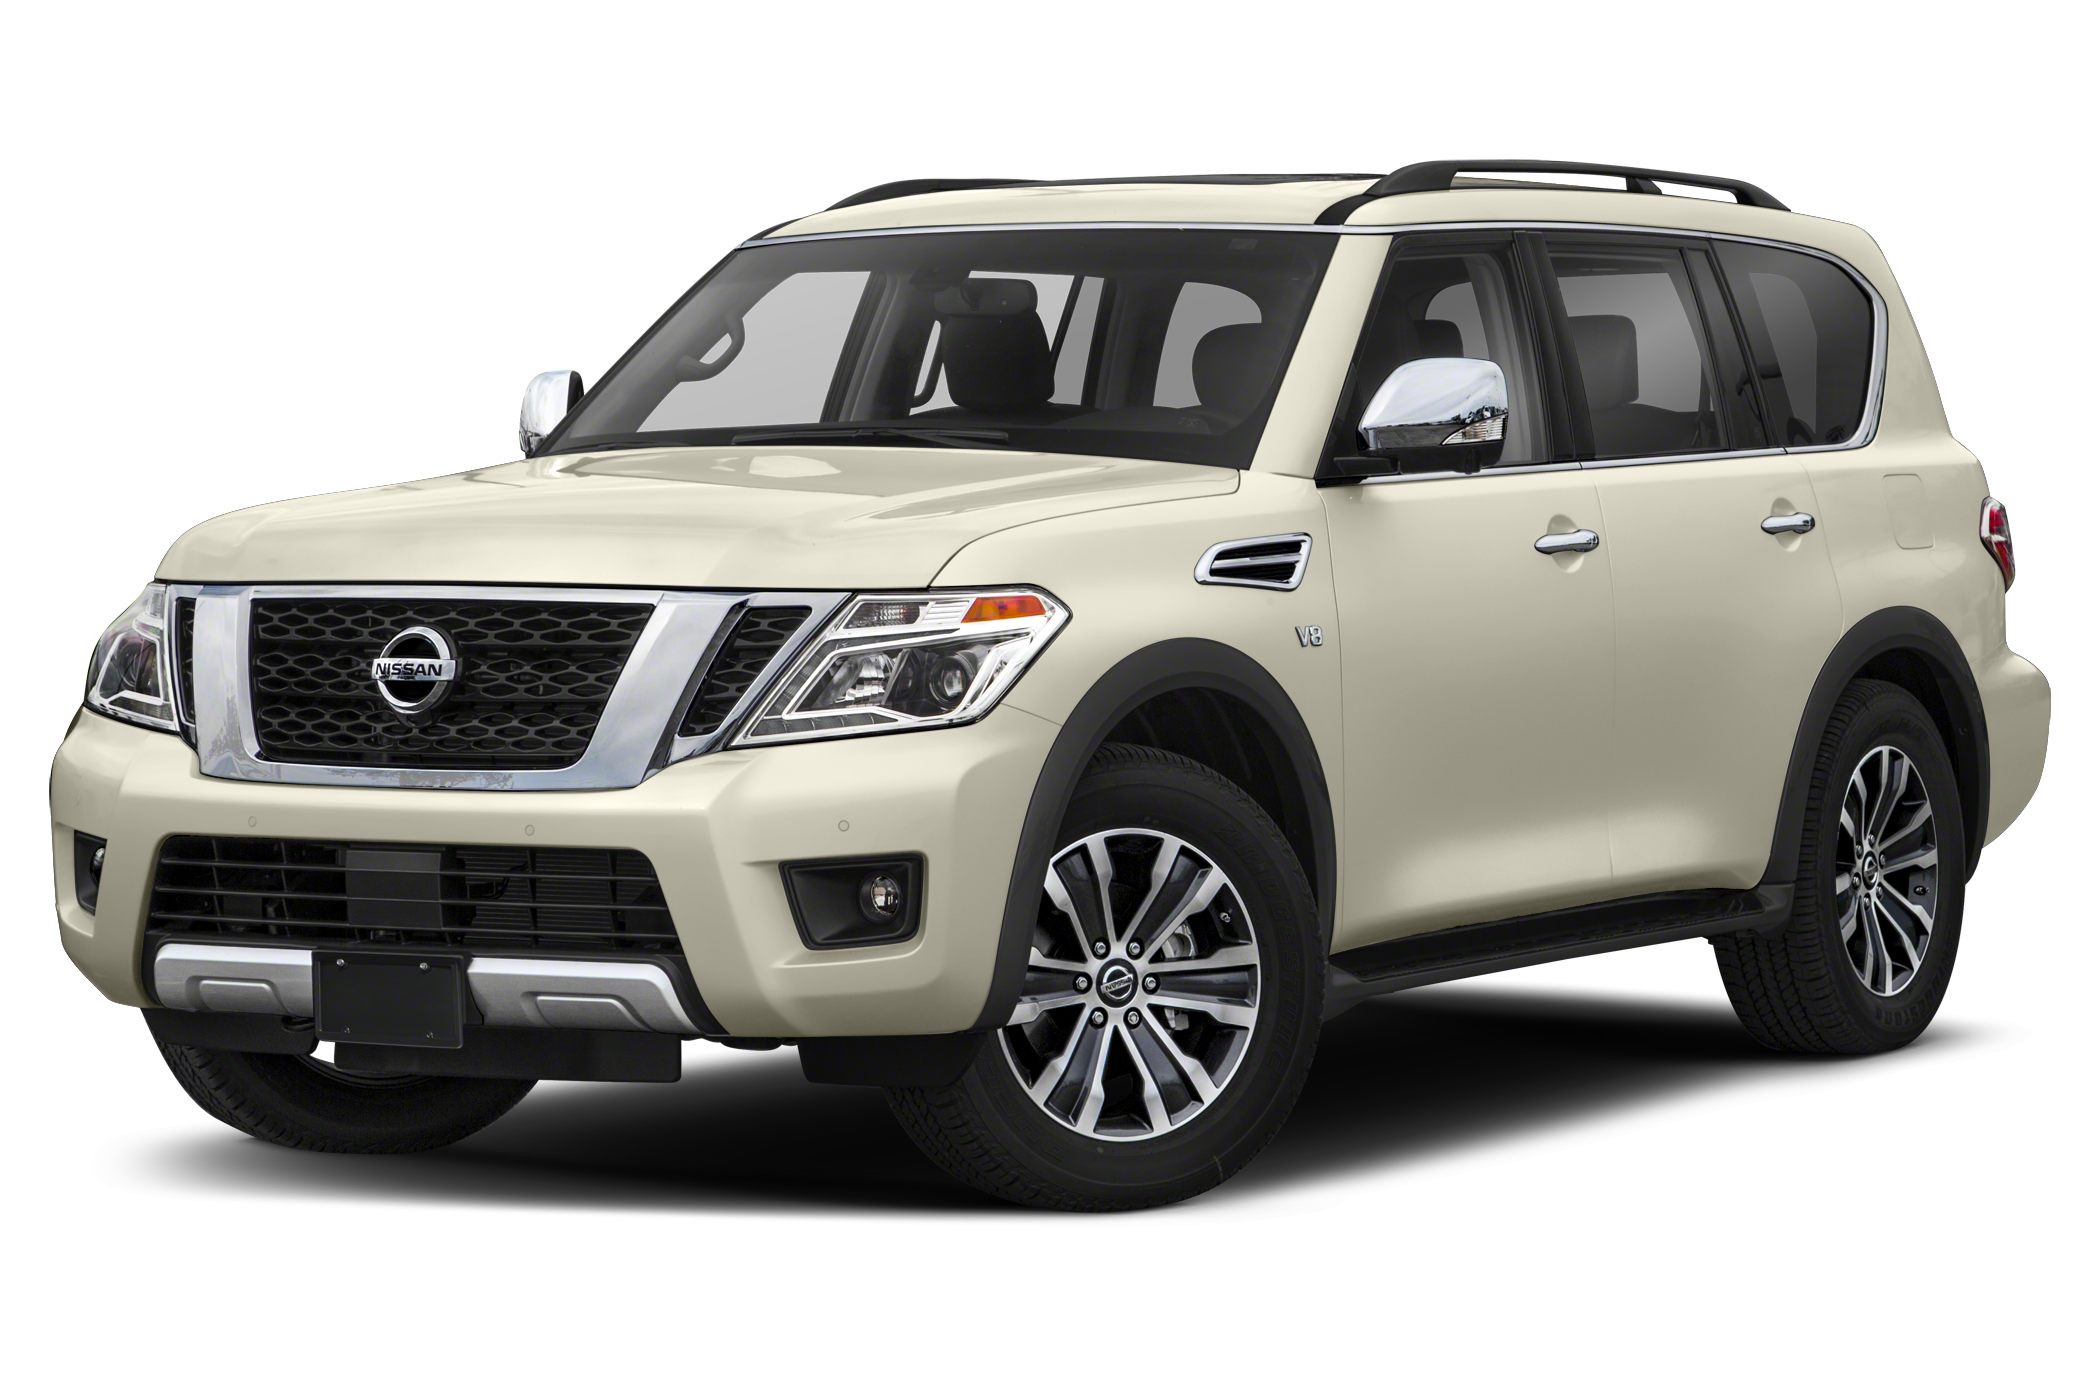 2019 Nissan Armada Sl 4dr All Wheel Drive Pictures